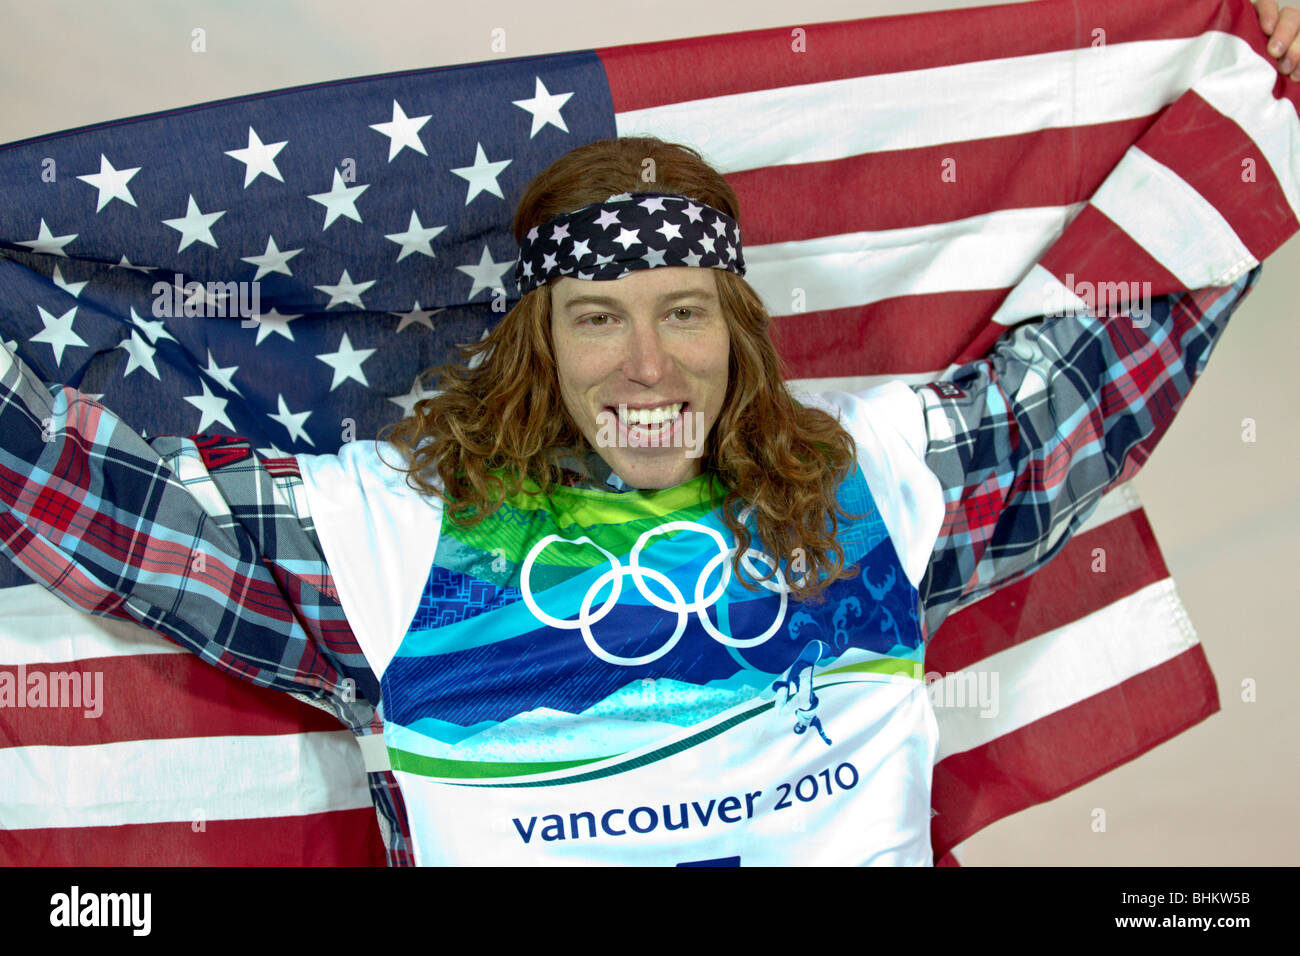 What Olympic Medals Has Shaun White Won? And for What Events?